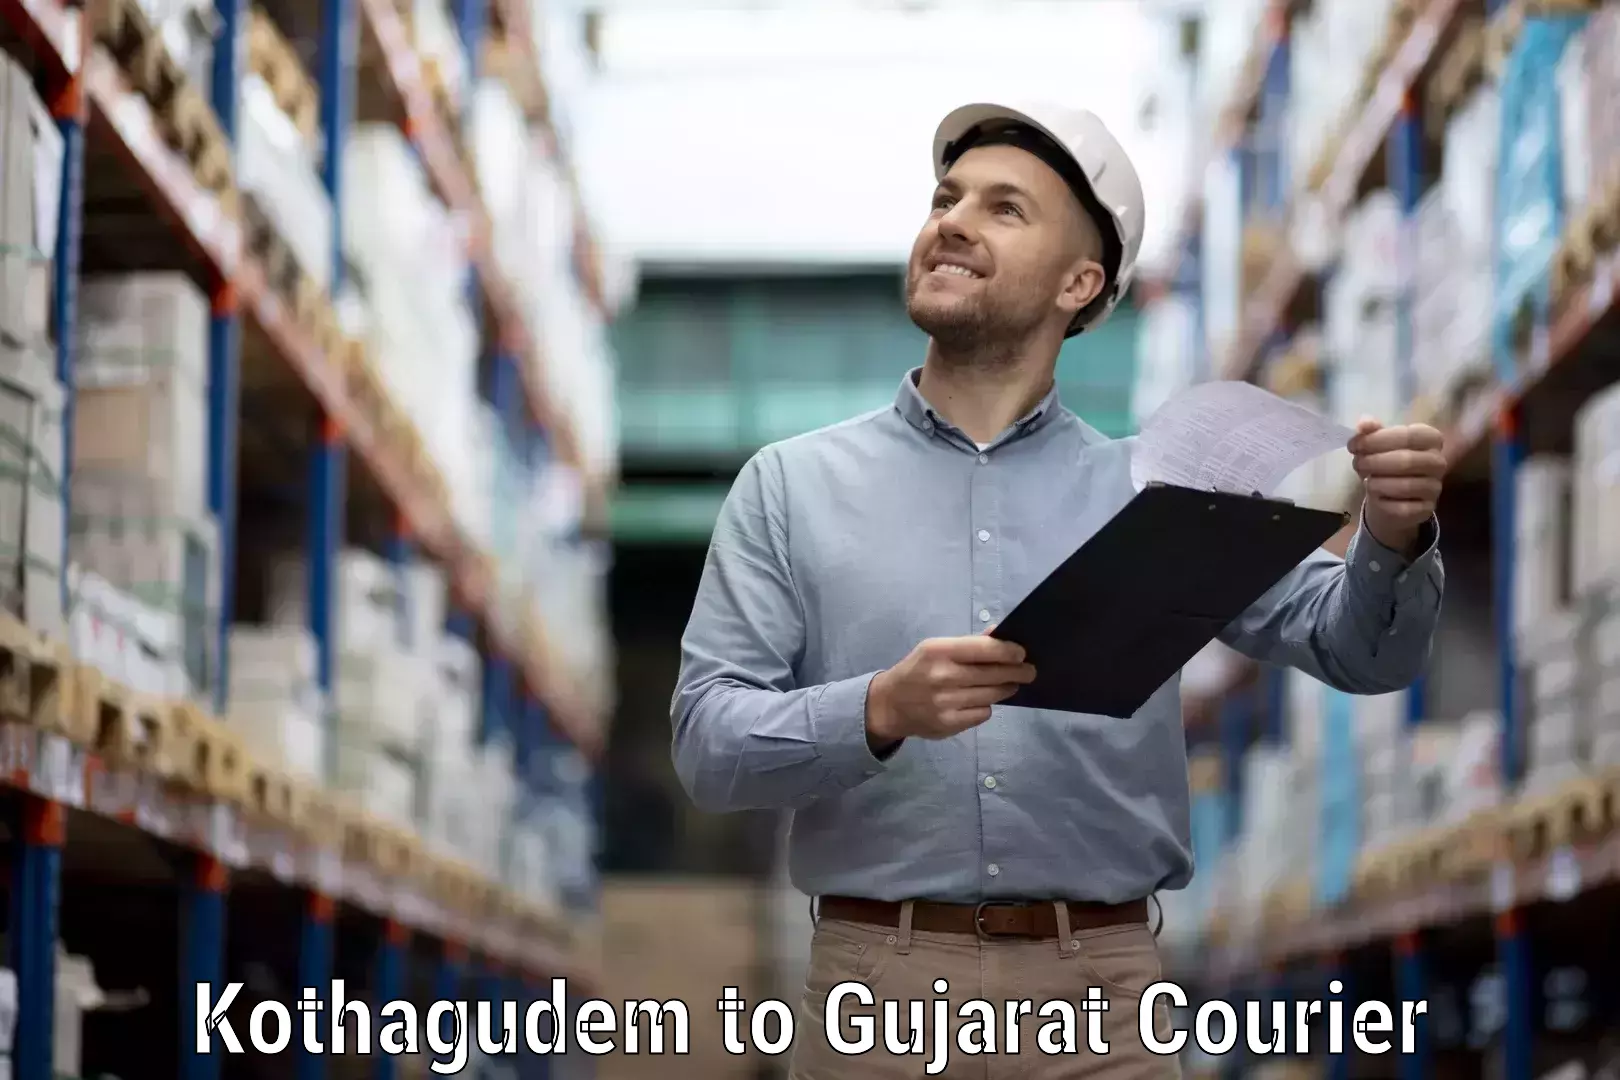 State-of-the-art courier technology Kothagudem to Jetpur